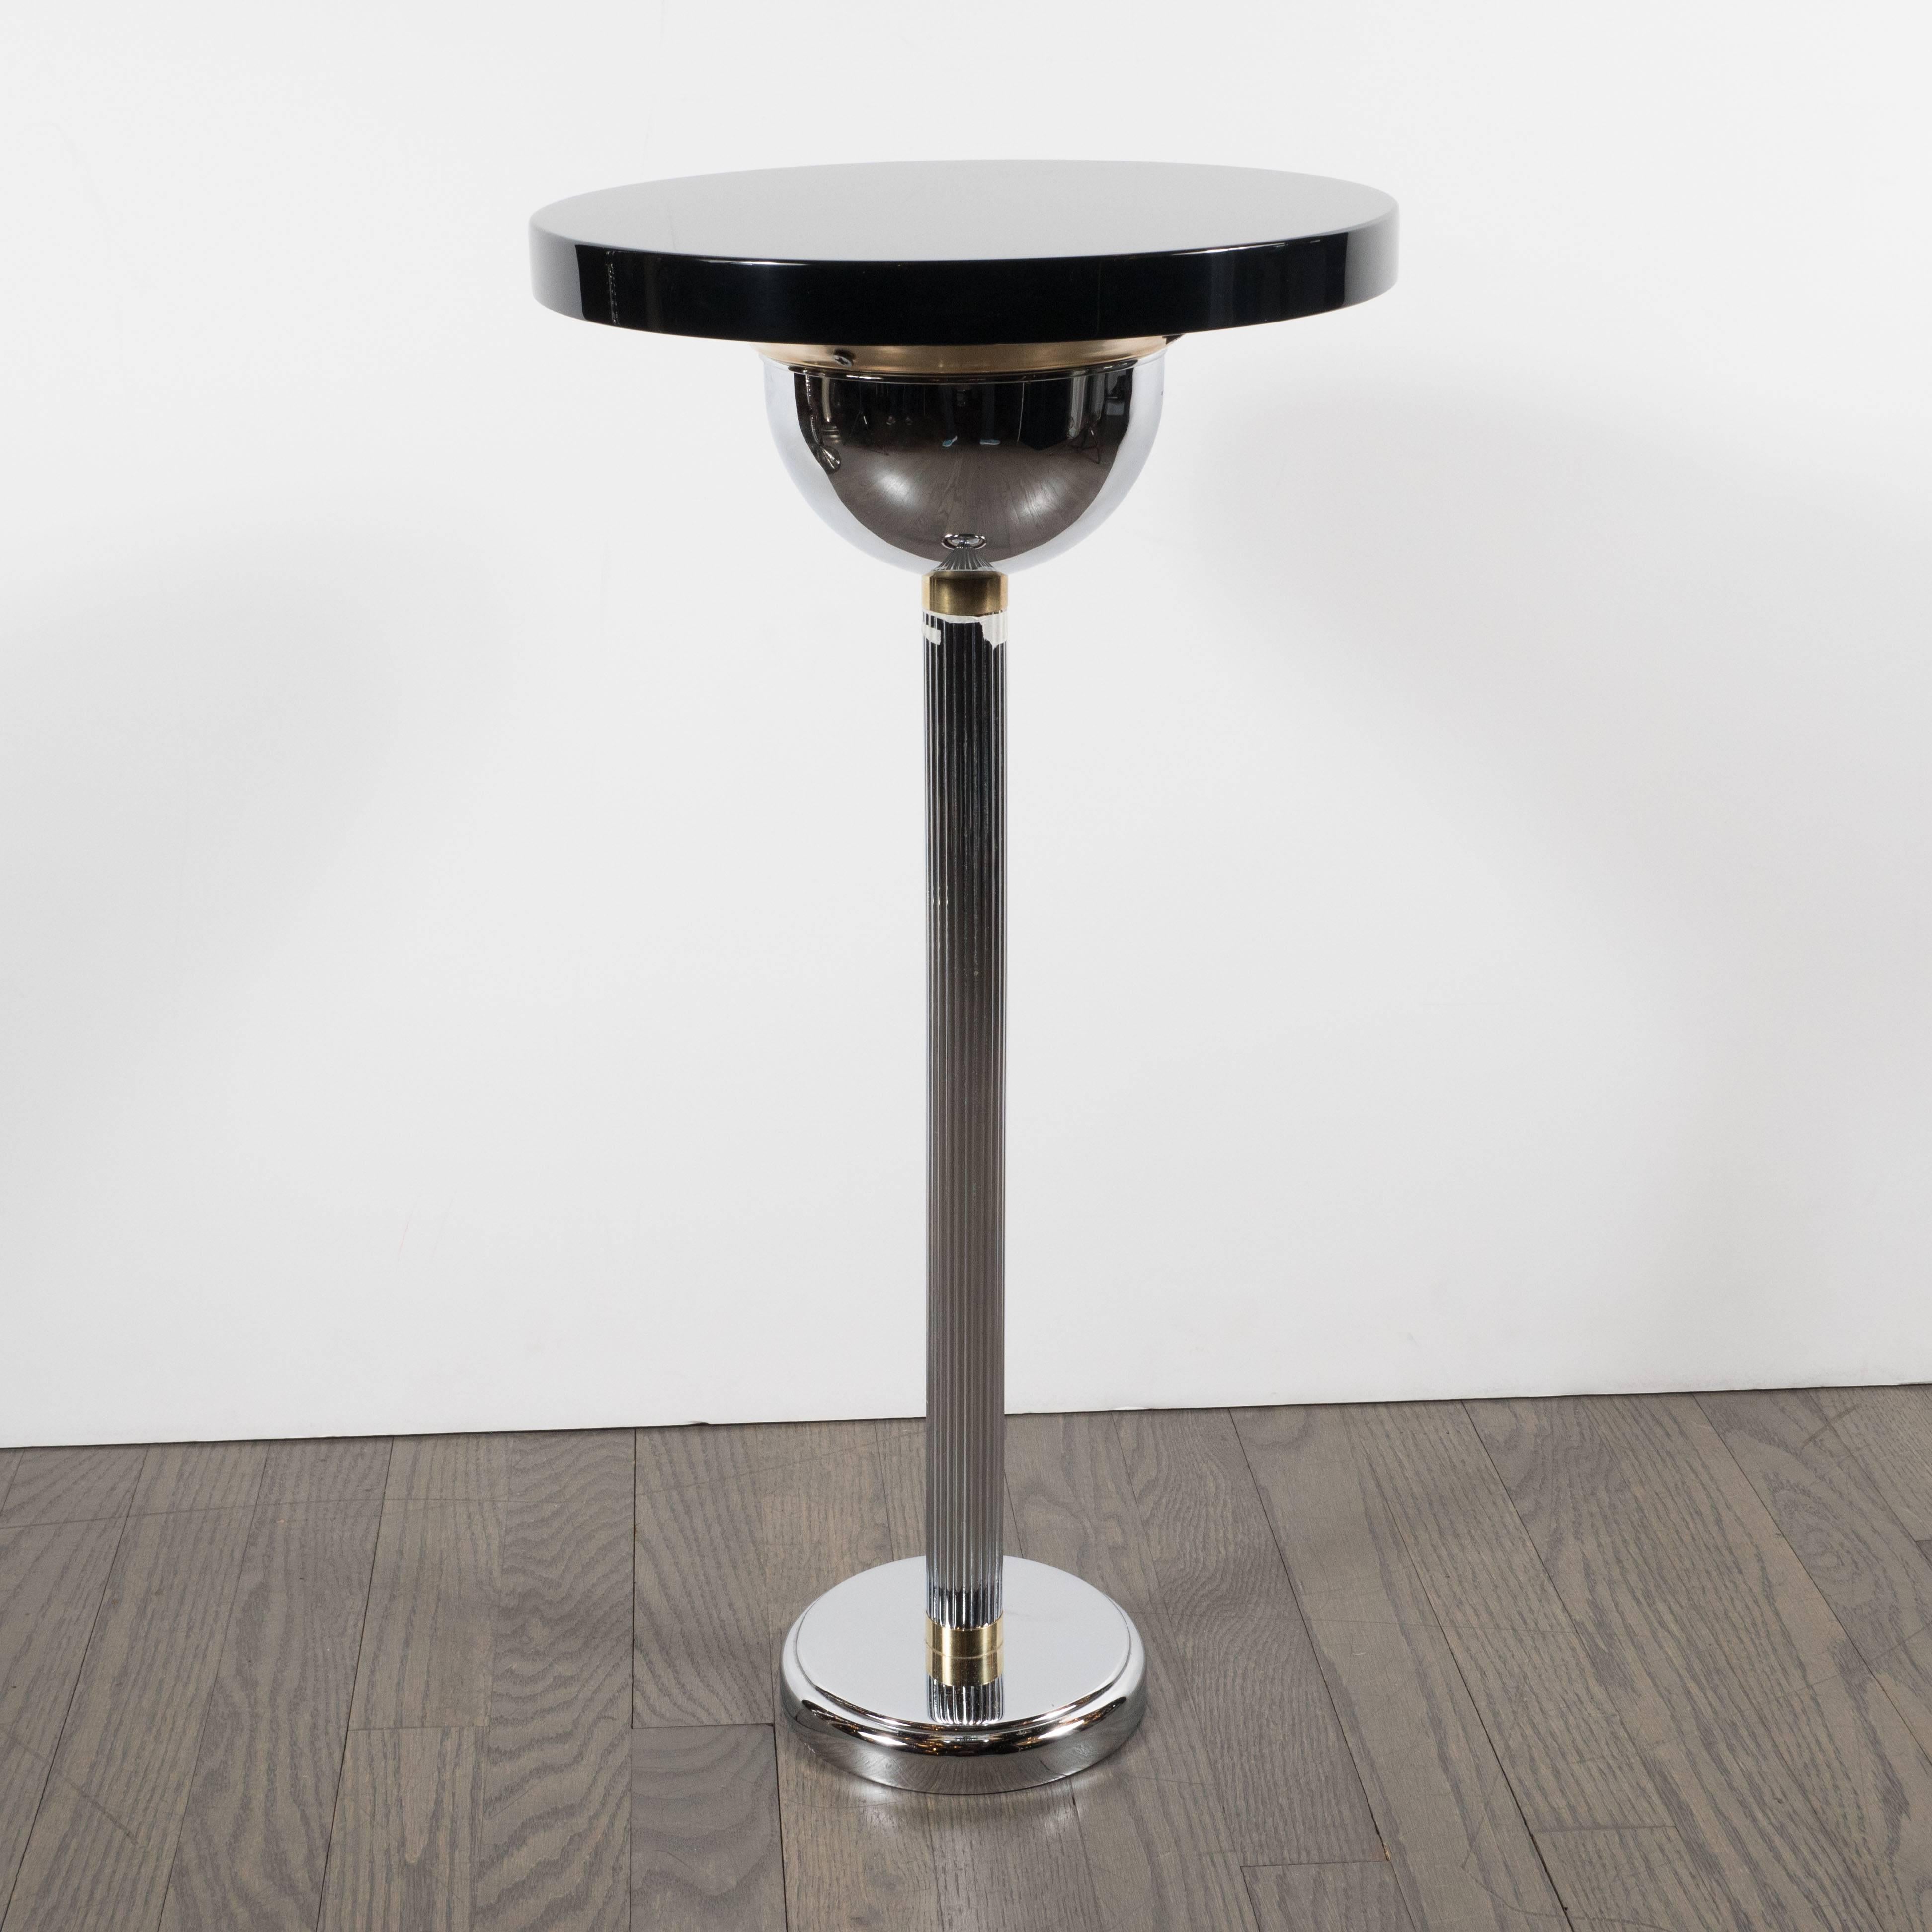 American Art Deco Machine Age Drinks Table in Black Lacquer and Chrome